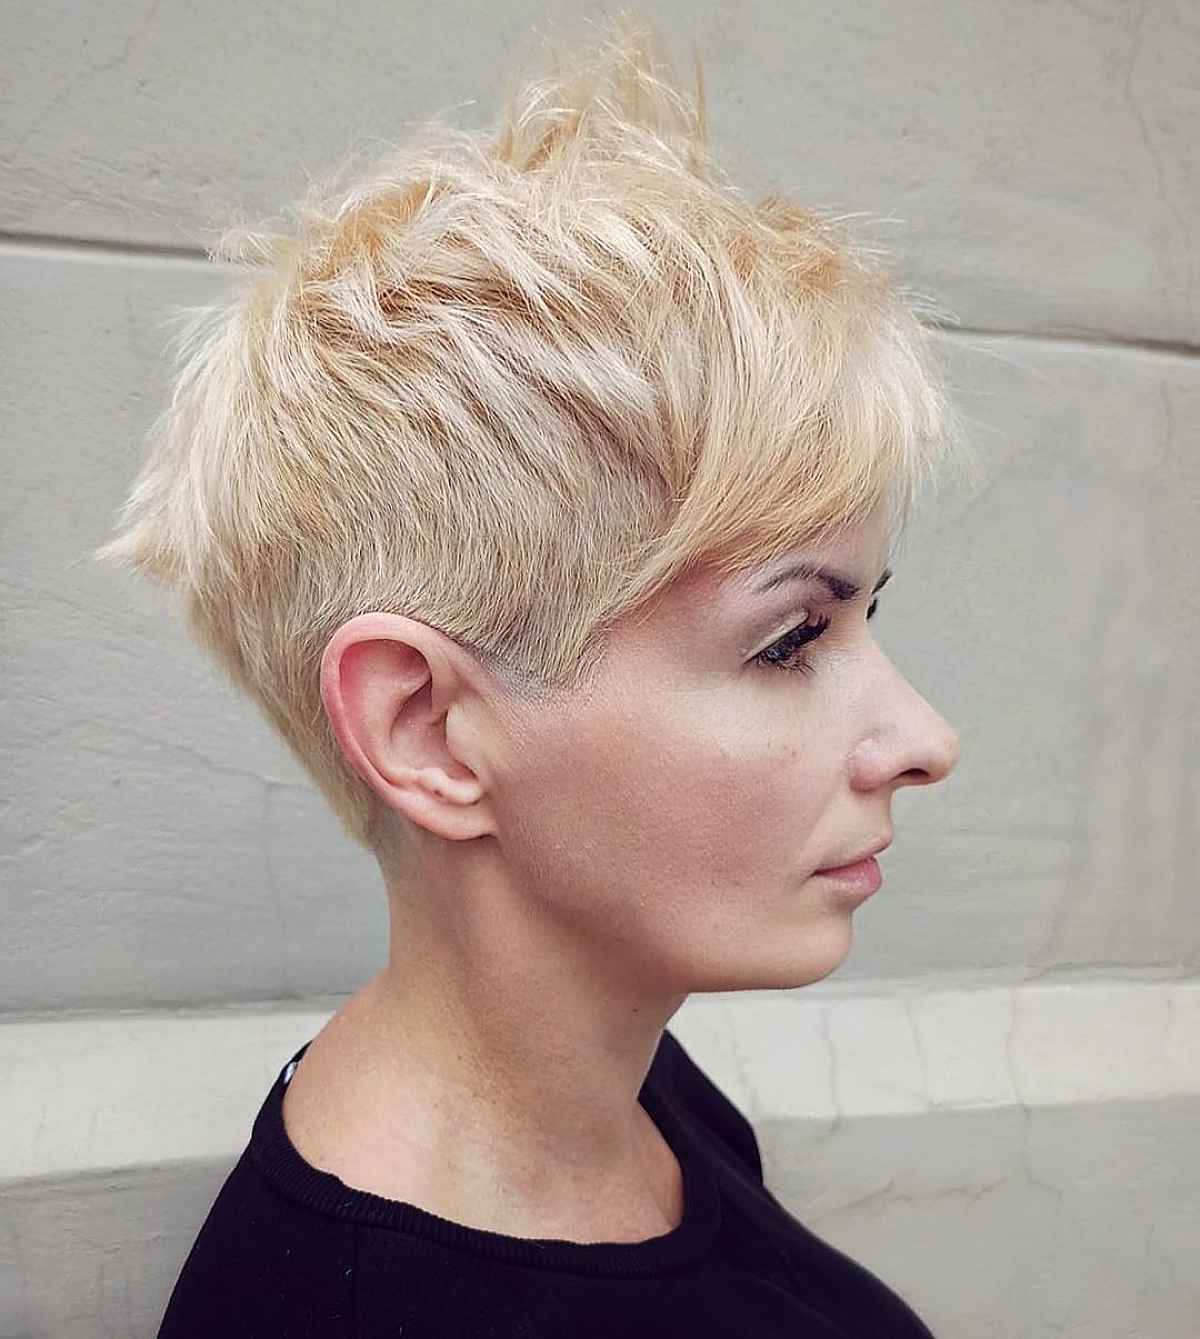 Sexiest blonde pixie with layers hairstyle